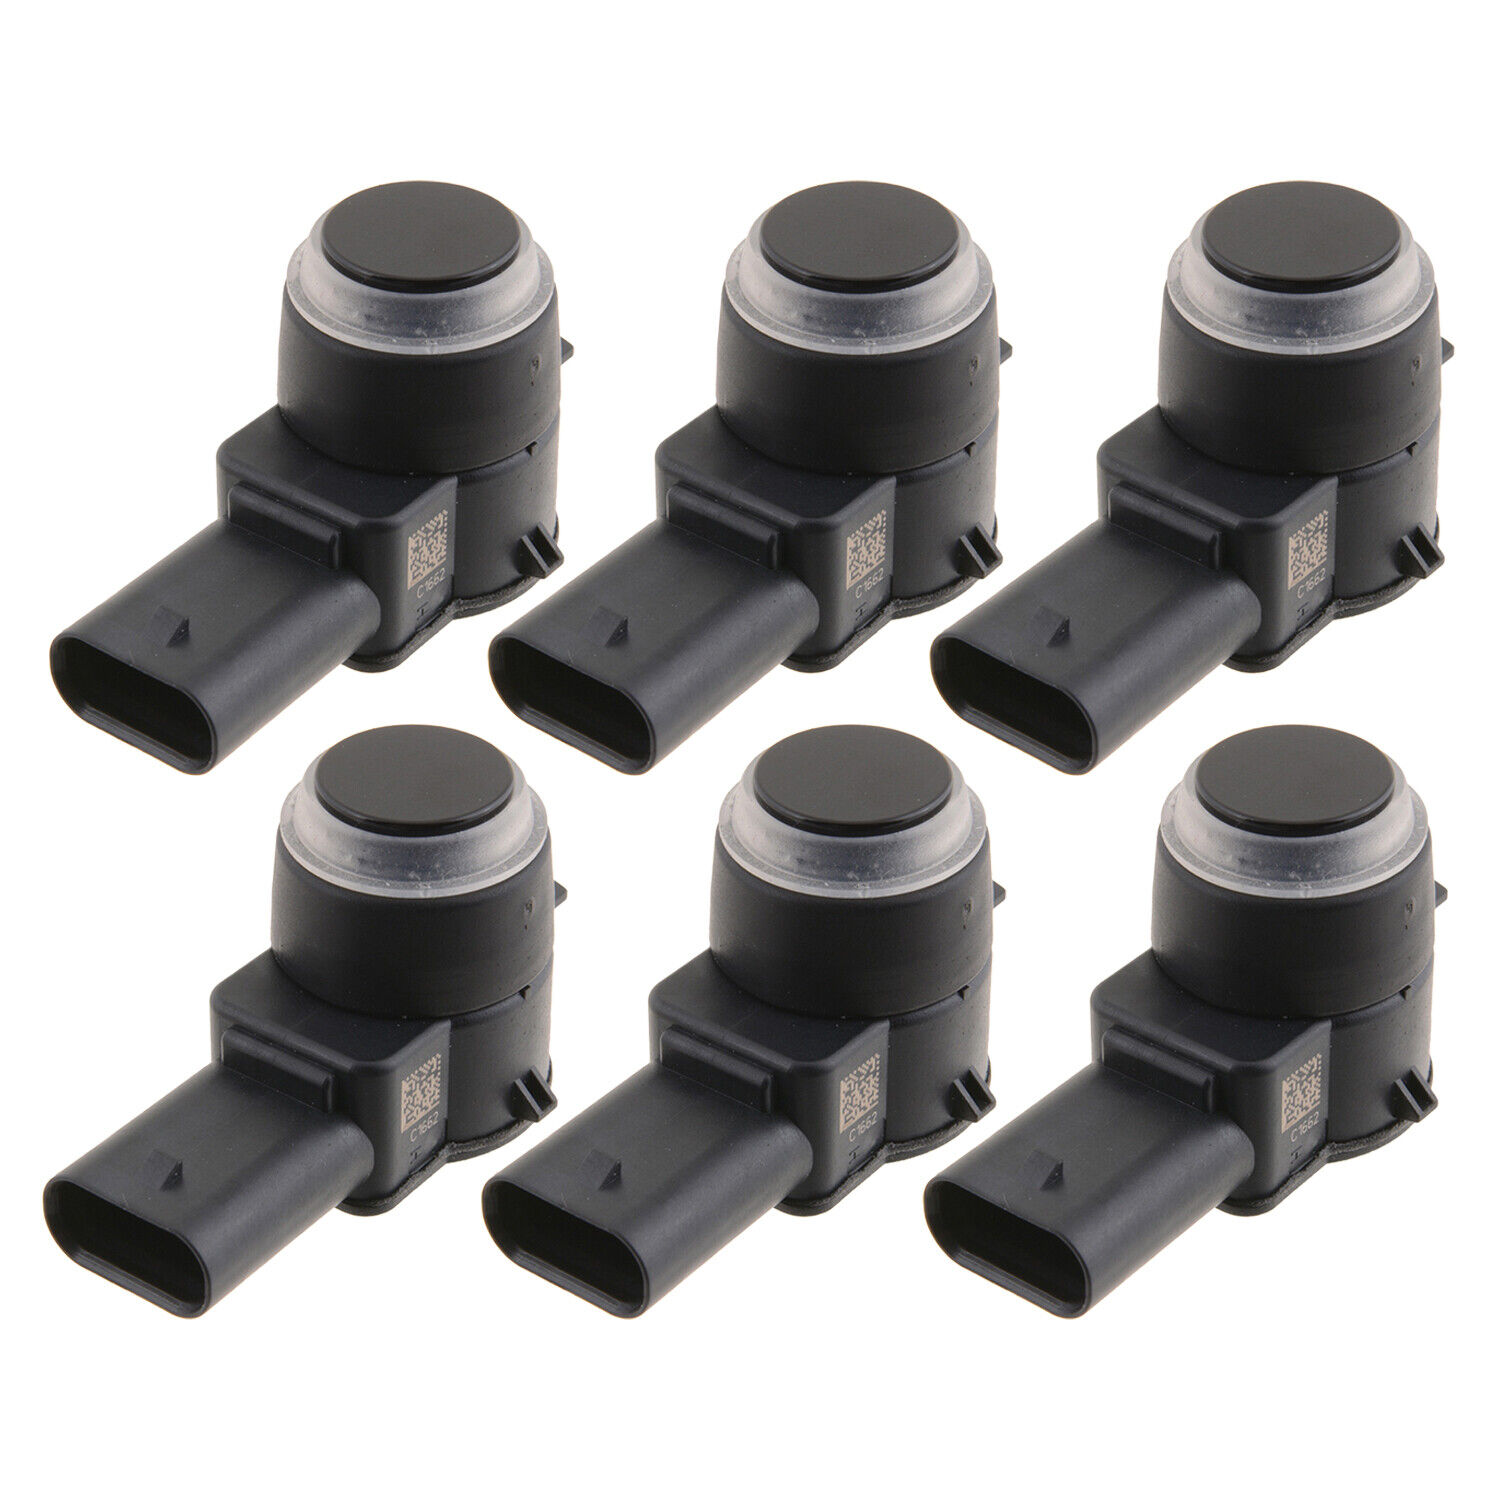 Bosch Front Parking Aid Sensor Set (6 Pieces) For W463 G500 G55 AMG G63 AMG